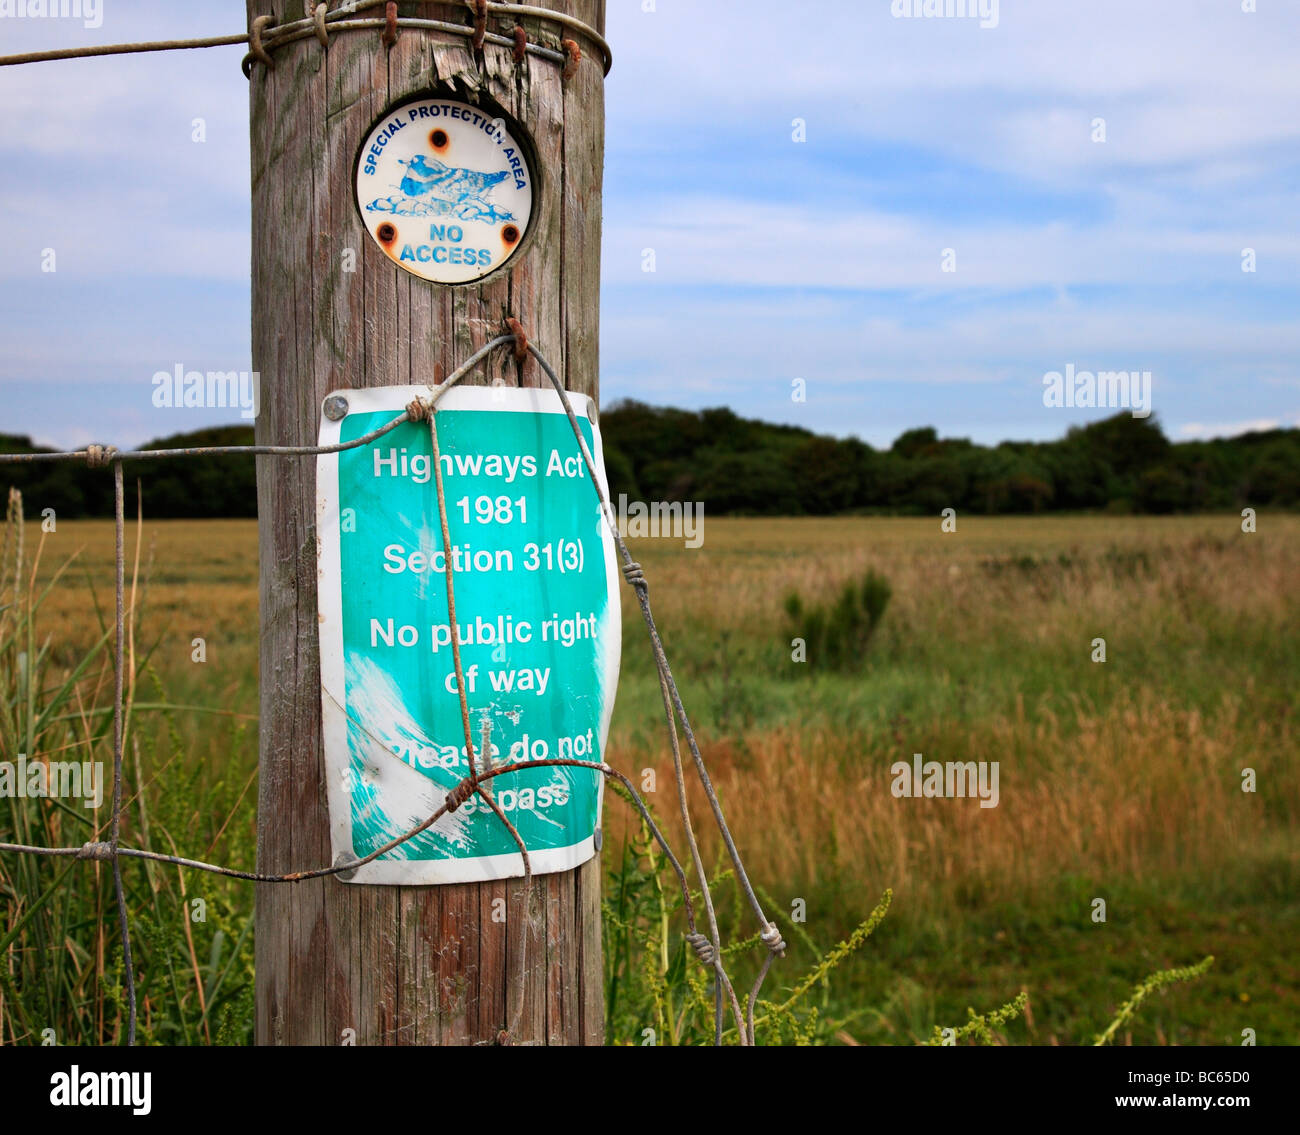 Special Protection Area and trespass notice. Climping, Near Littlehampton, West Sussex, England, UK. Stock Photo